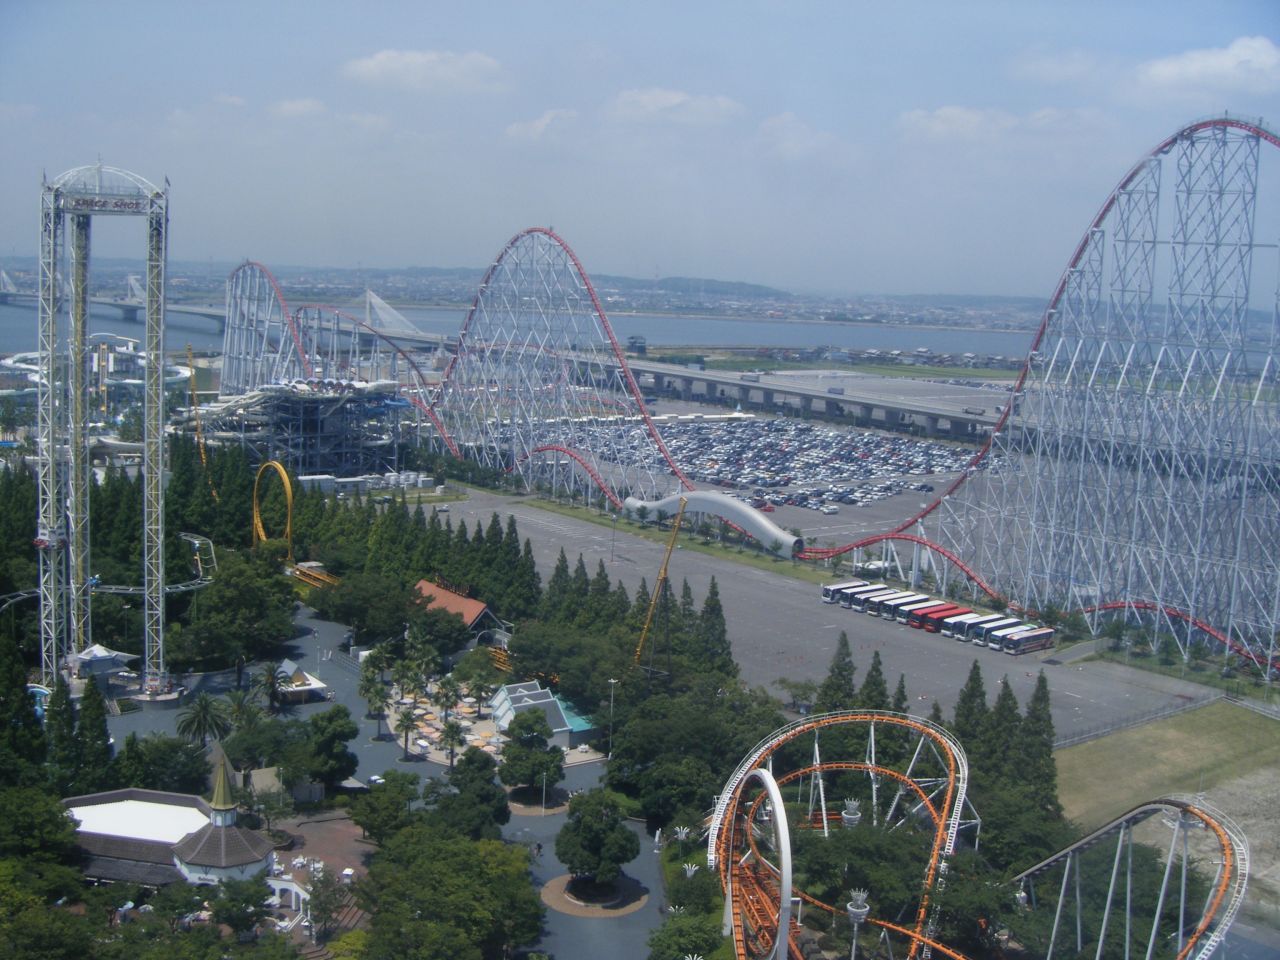 <strong>18. Nagashima Spa Land, Japan:</strong> The Steel Dragon roller coaster is built for speed at Nagashima Spa Land in Kuwana, Japan. 